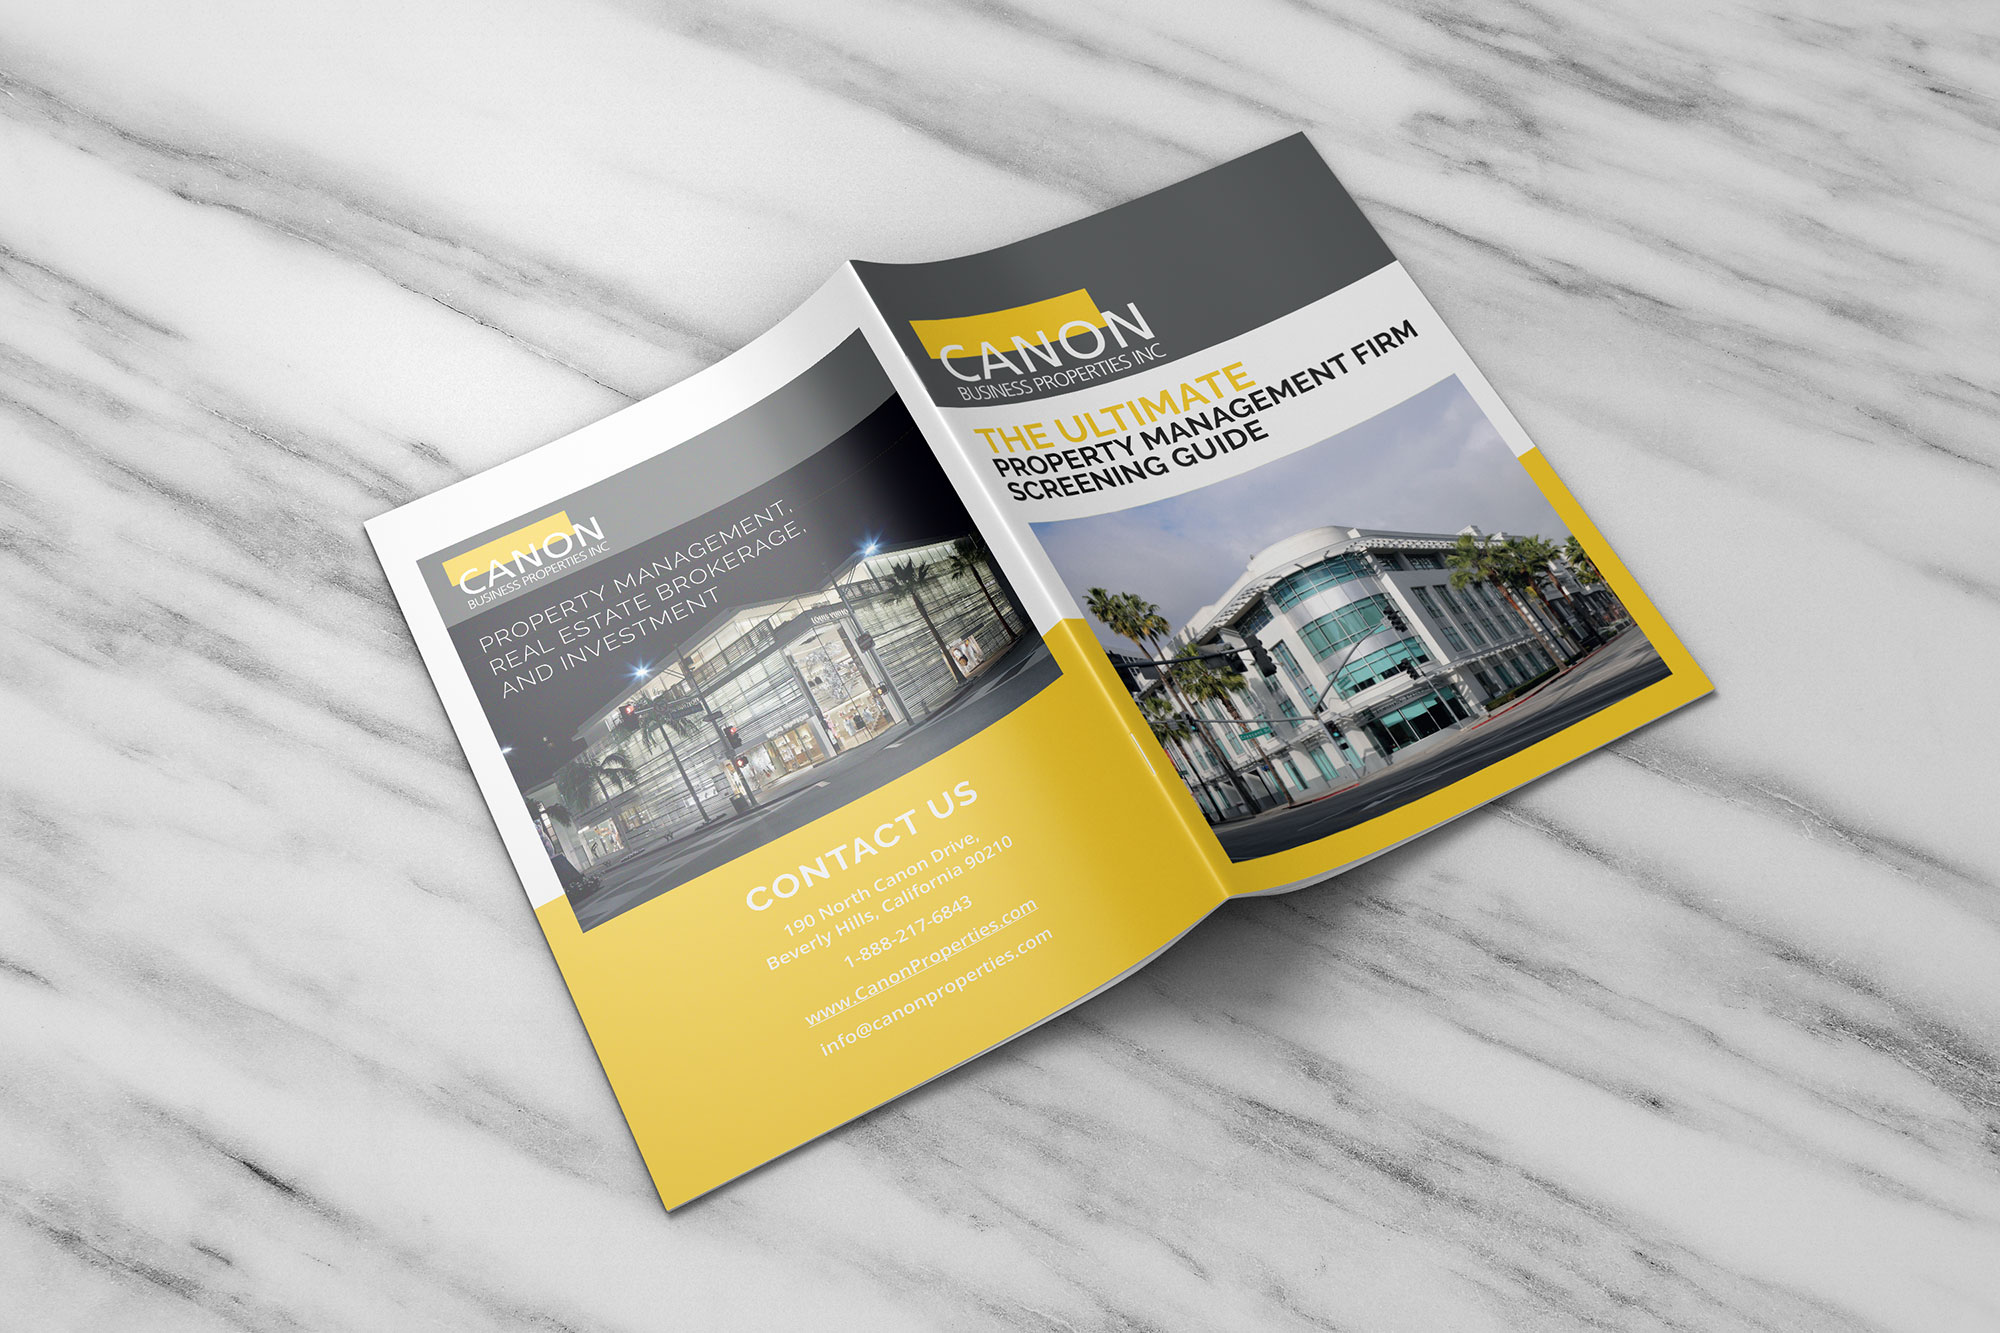 Download our Free Property Management Guide